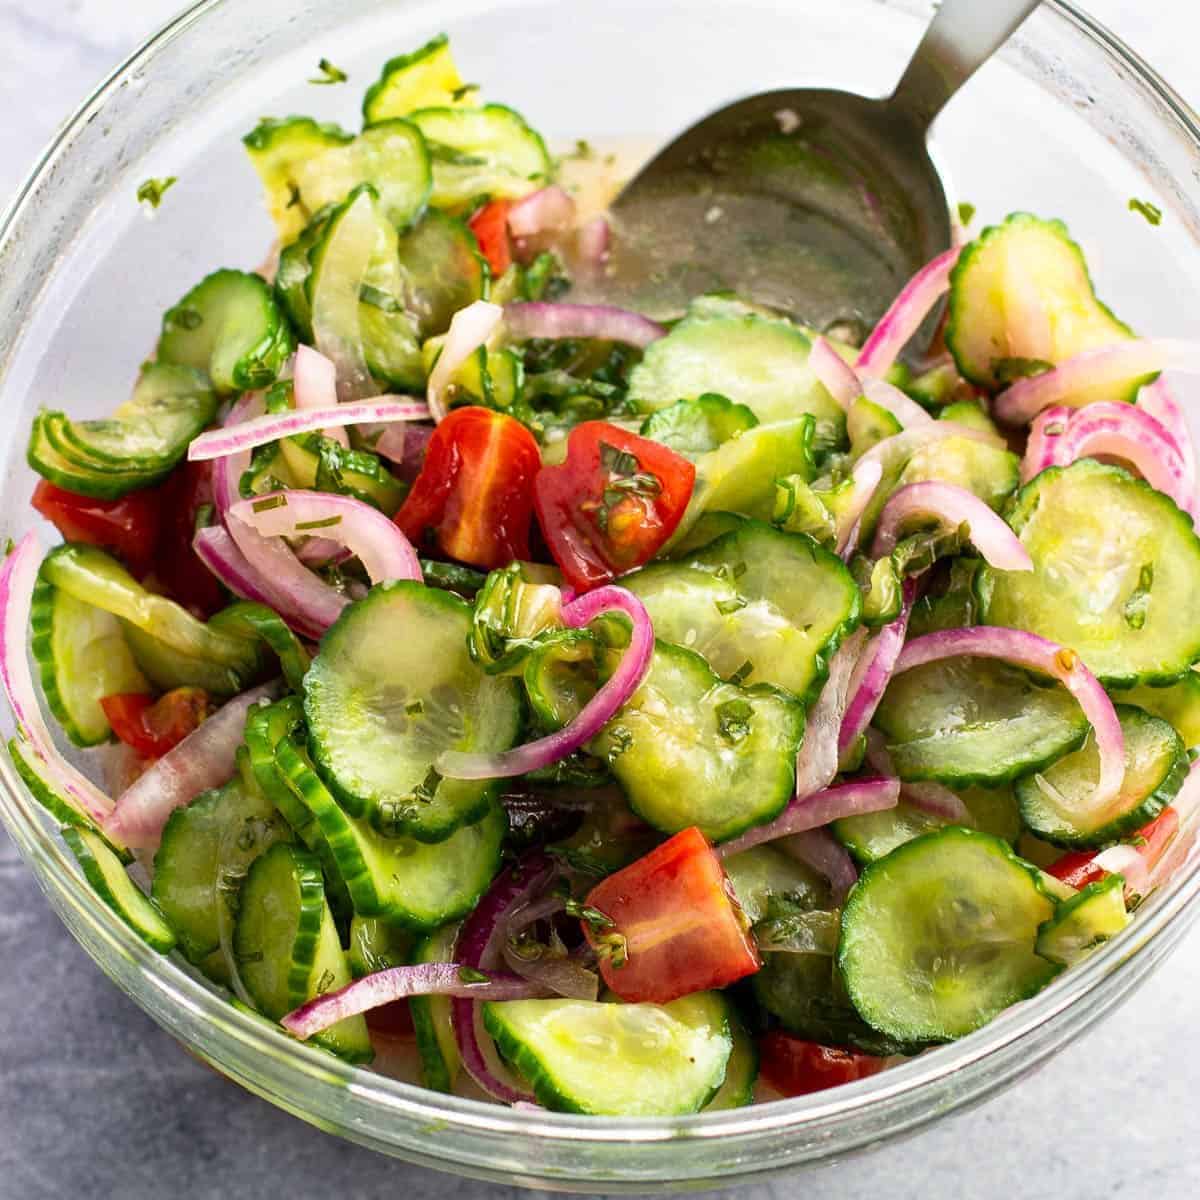 Marinated Cucumber Tomato Onion Salad in a glass bowl with a serving spoon.